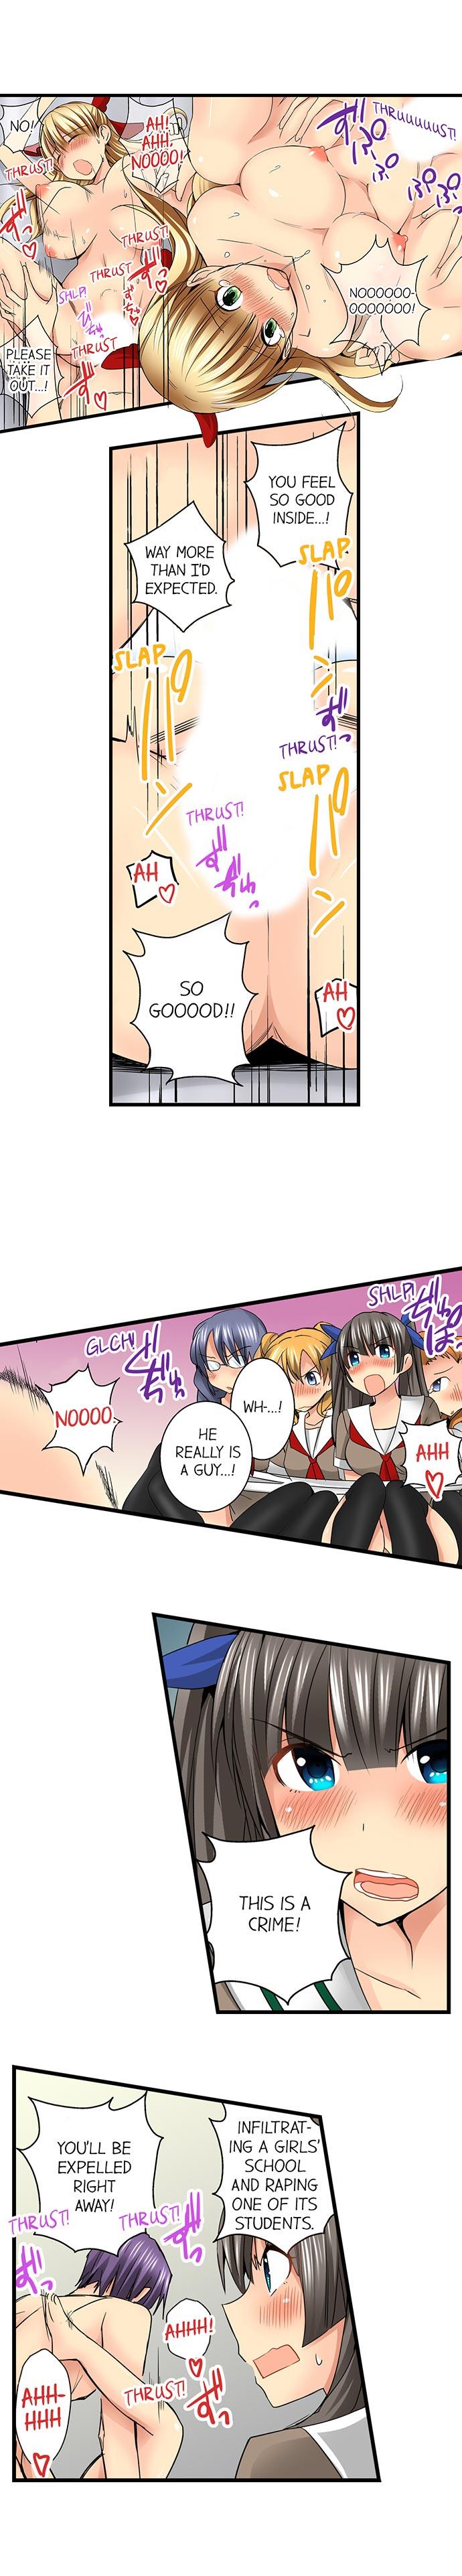 Sneaked Into A Horny Girls' School Chapter 18-30 85